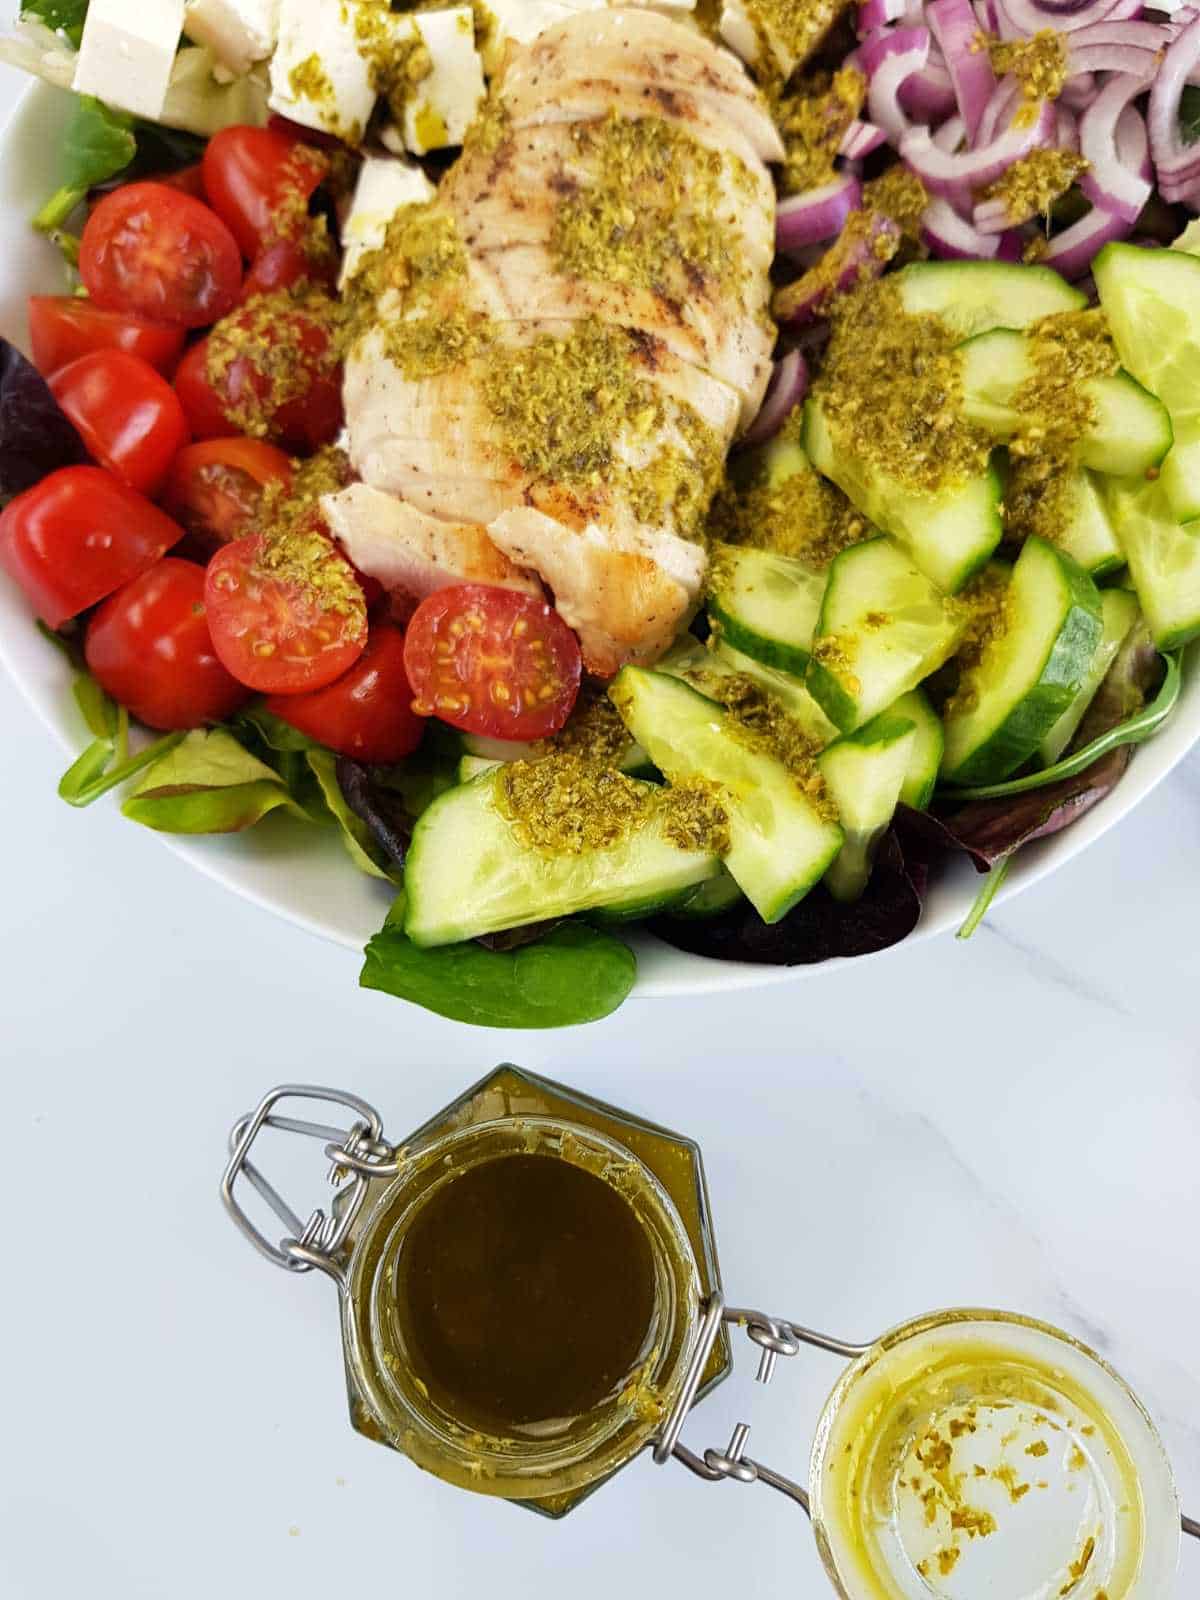 Pesto salad dressing in a jar next to a salad with a vinaigrette drizzle on top.